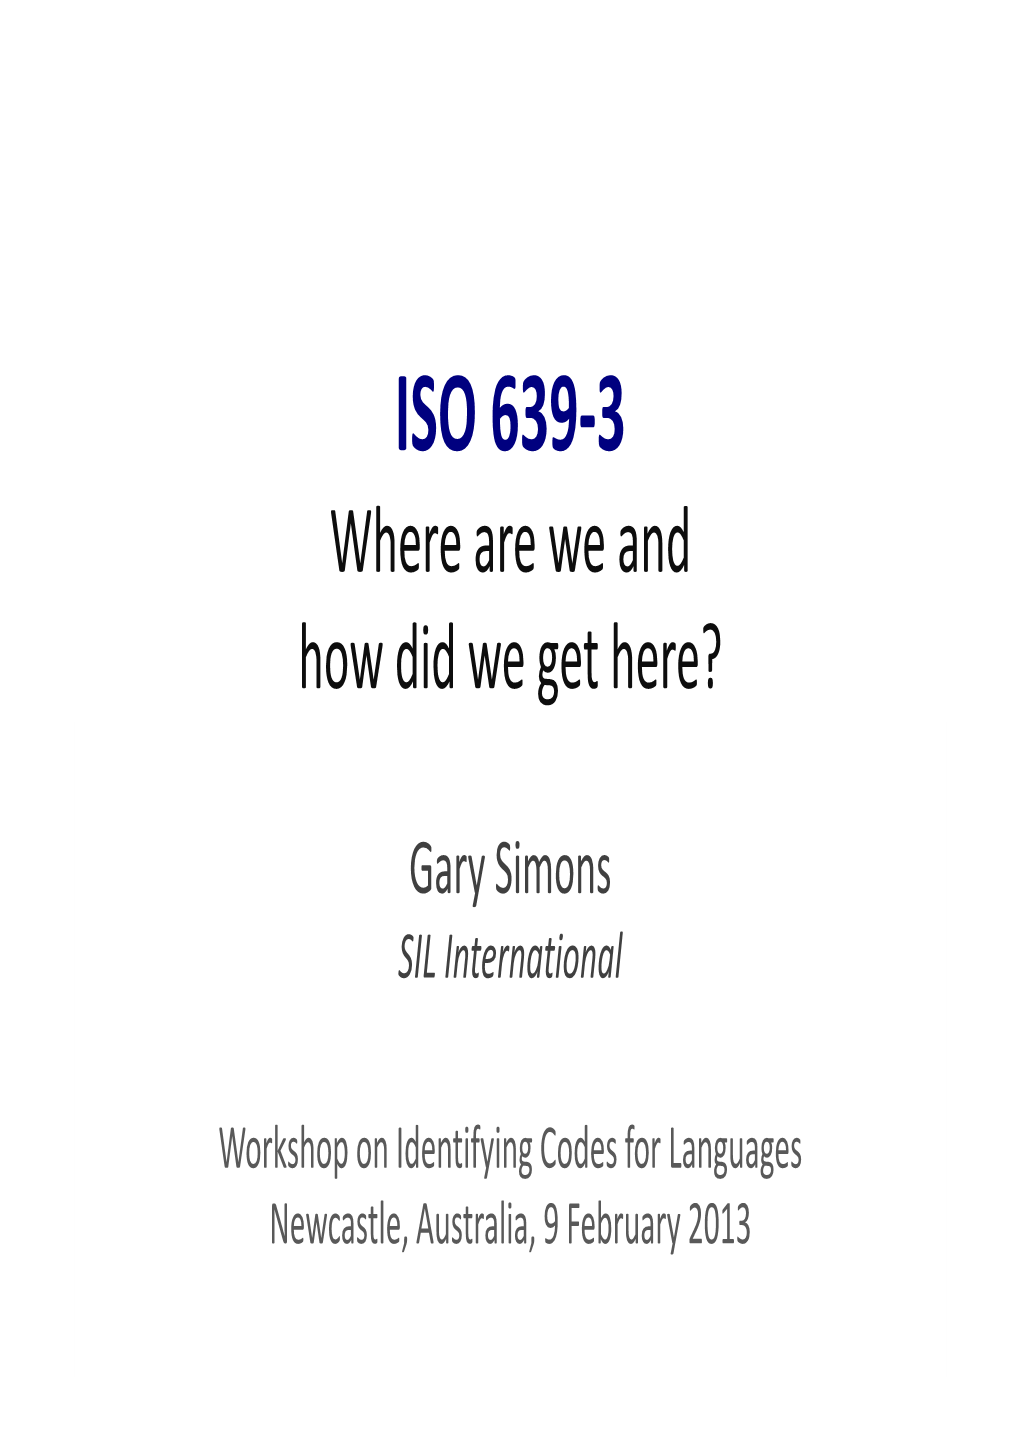 ISO 639-3 Where Are We and How Did We Get Here?